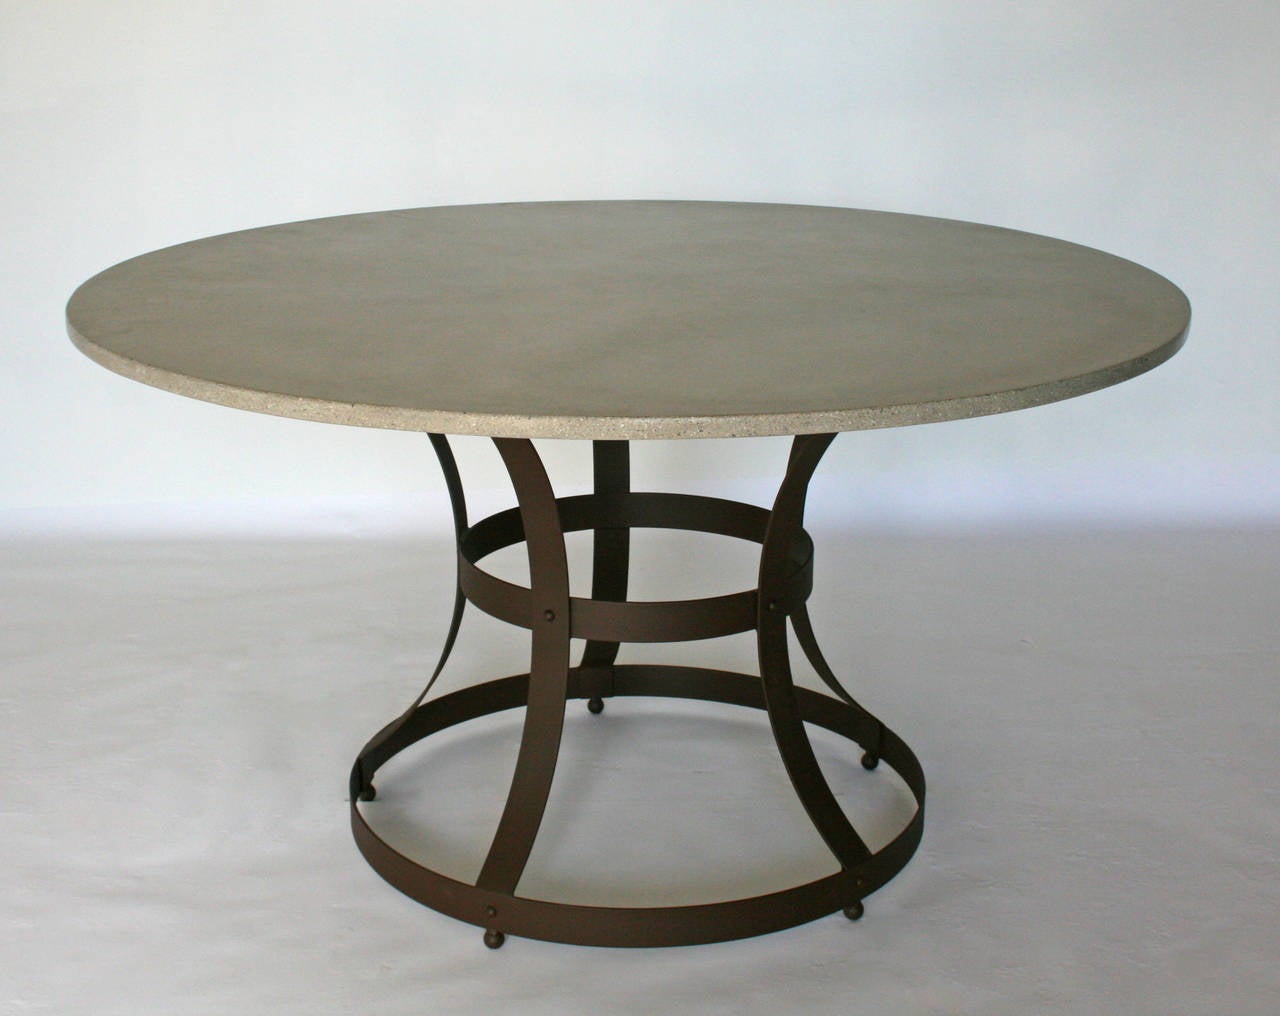 American James de Wulf Concrete Hourglass Dining Table, 48